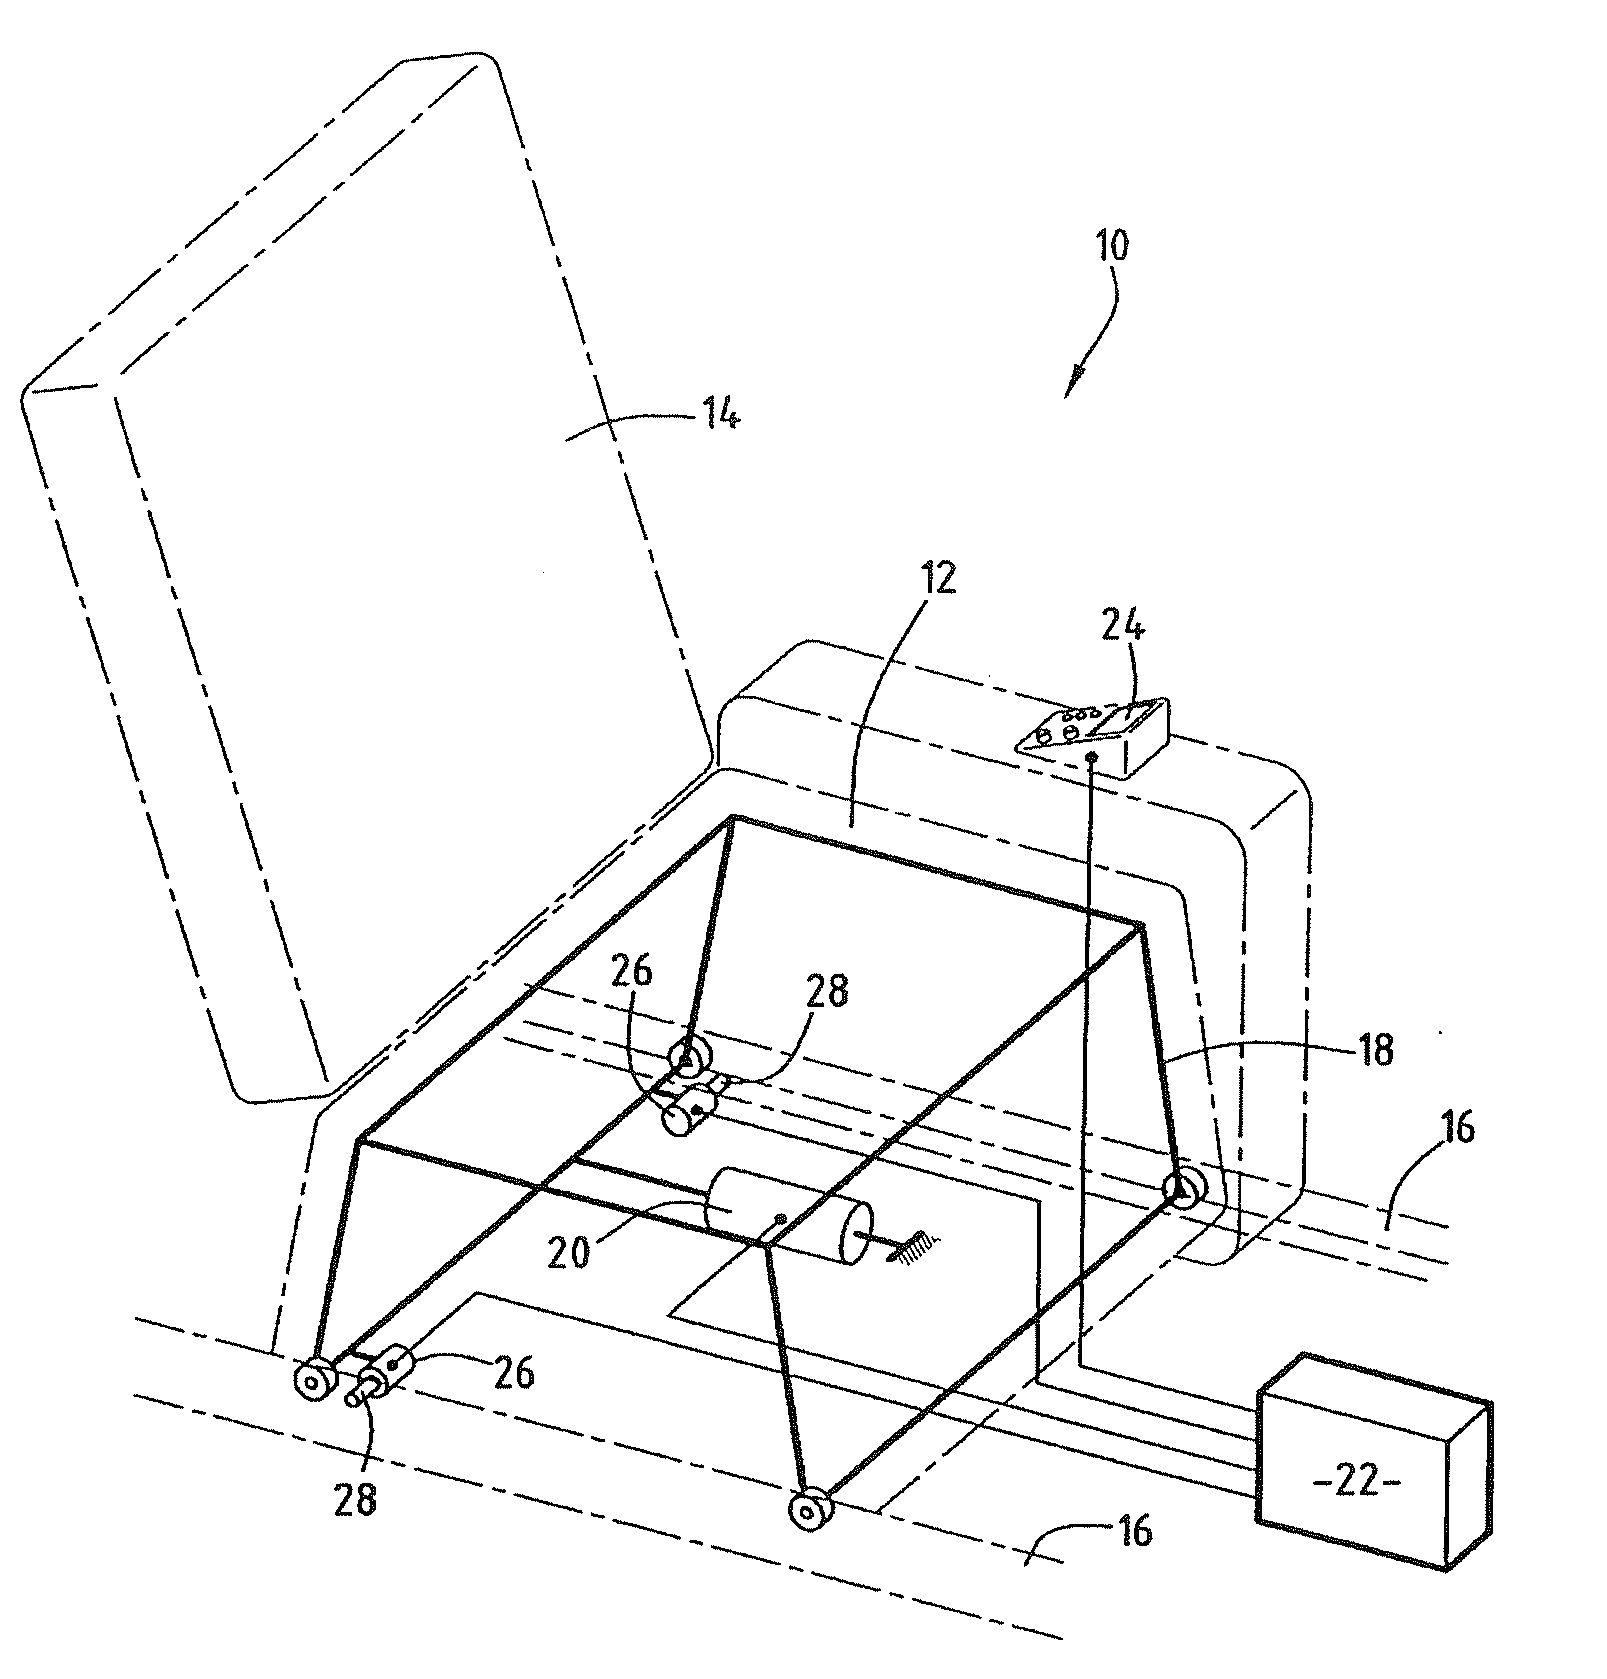 Method of controlling a seat